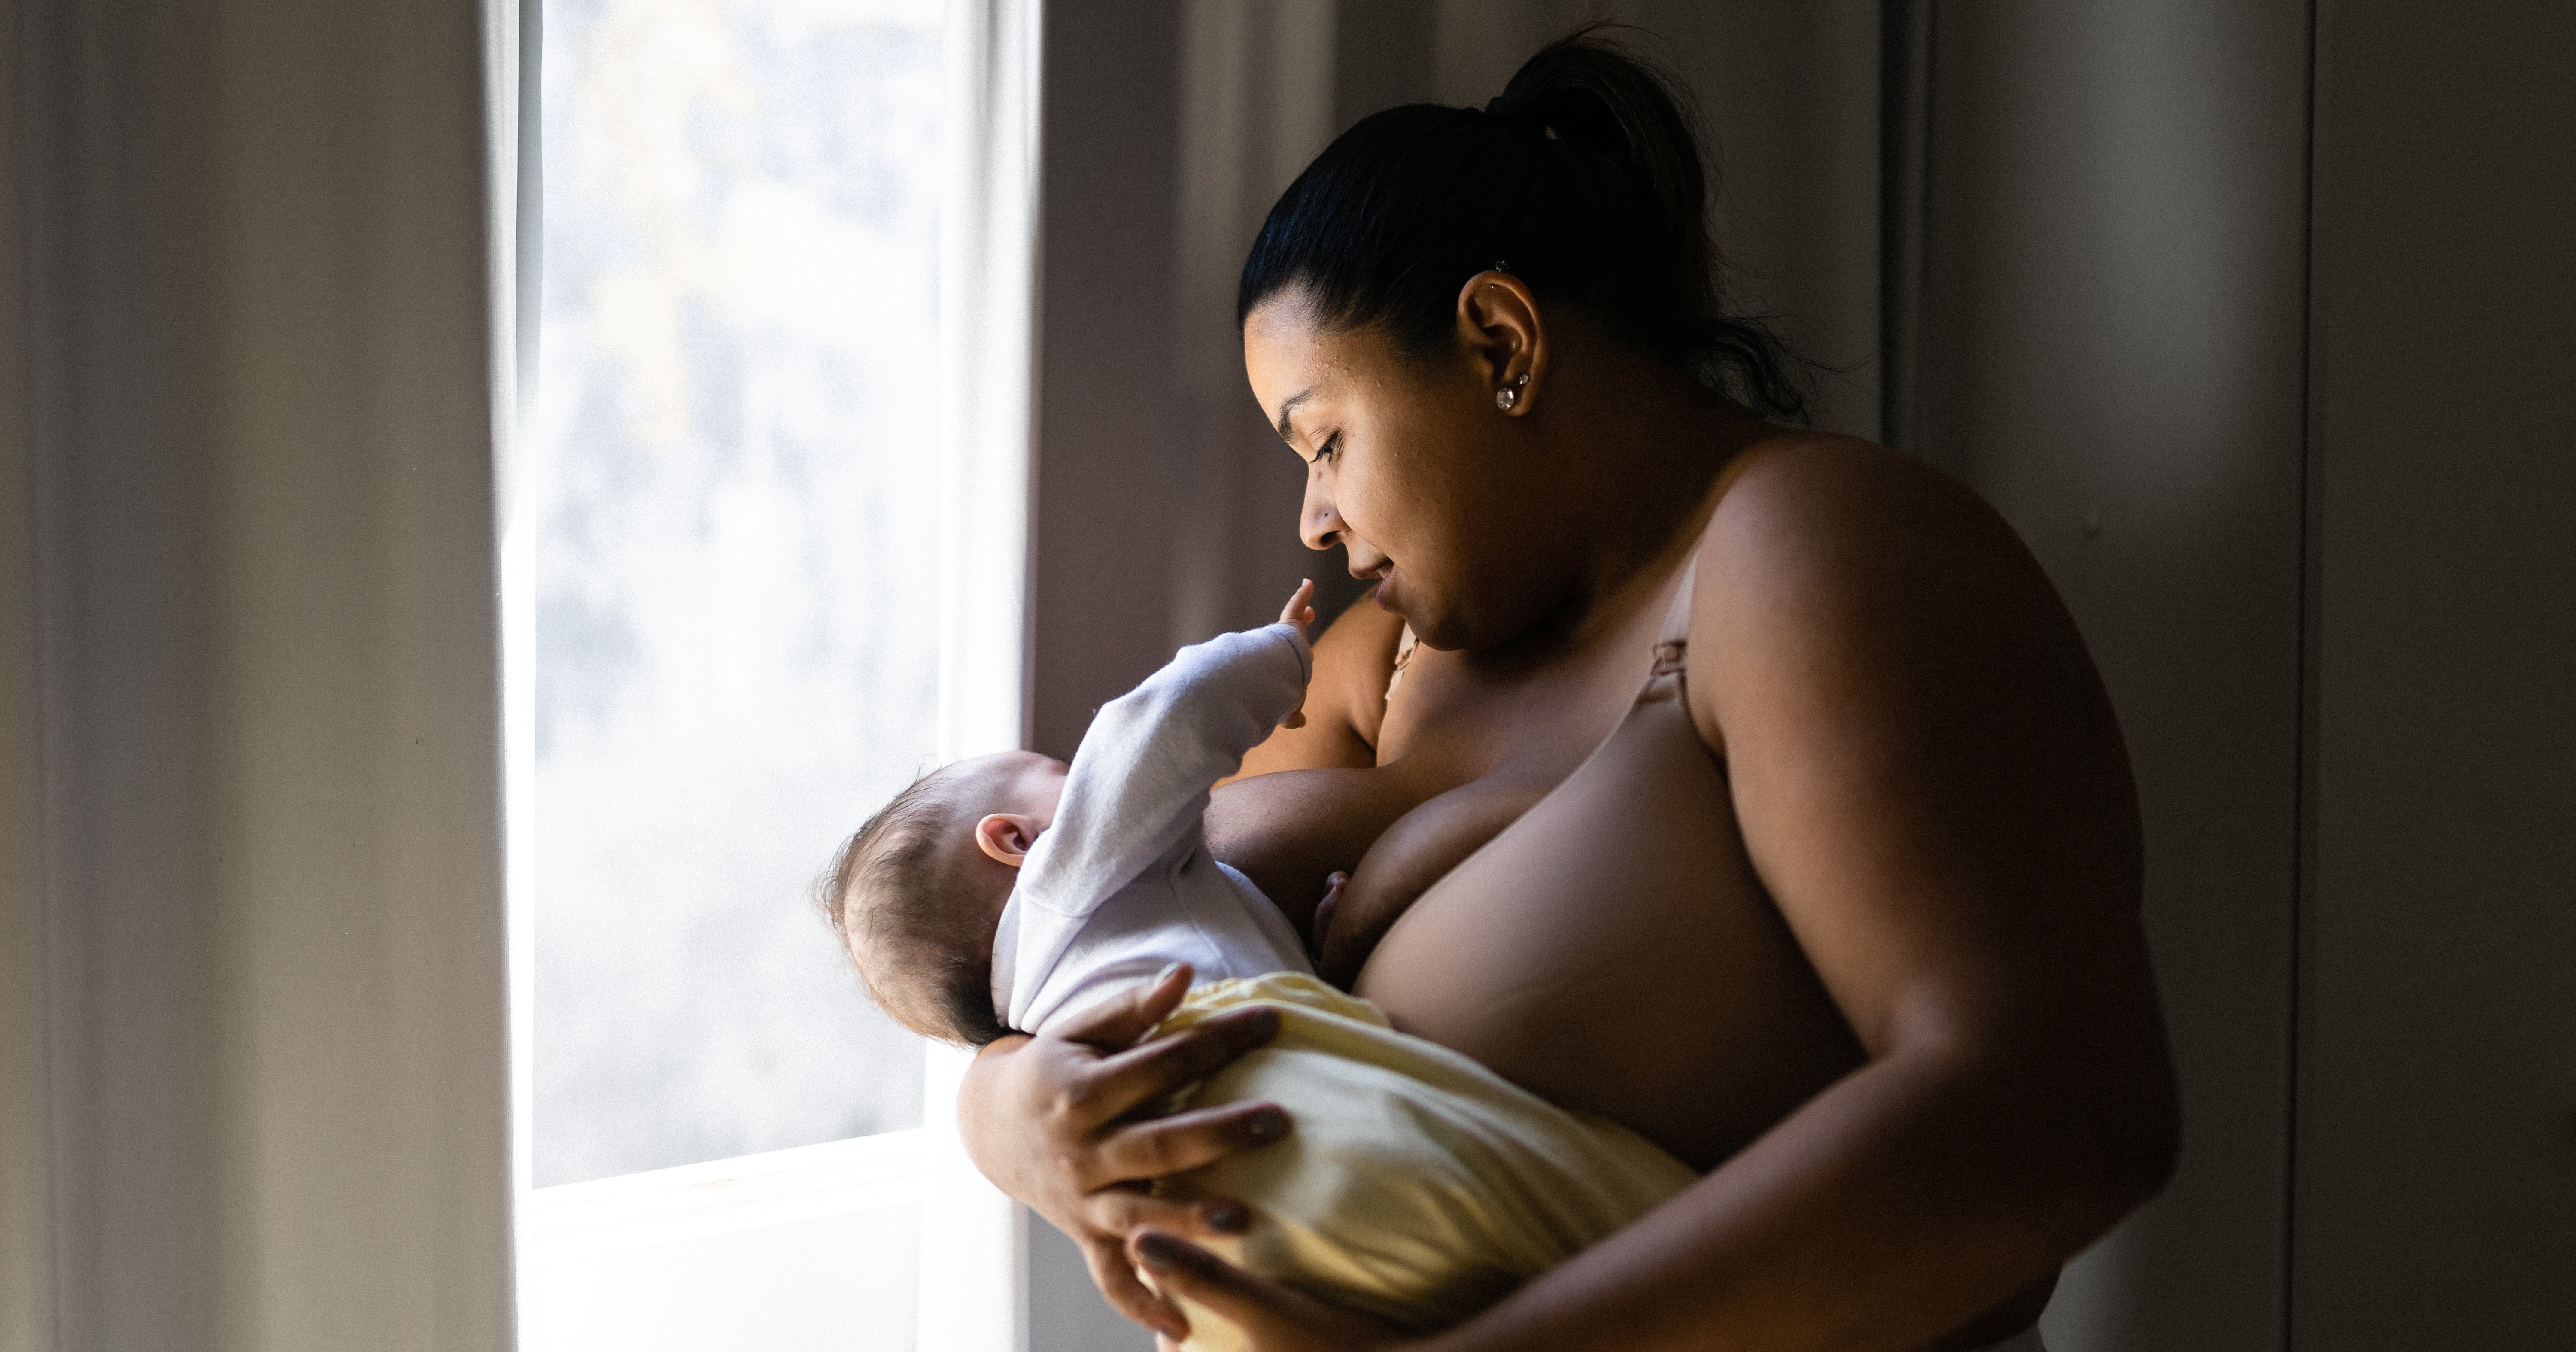 How to Get a Baby to Latch, According to Lactation Consultants